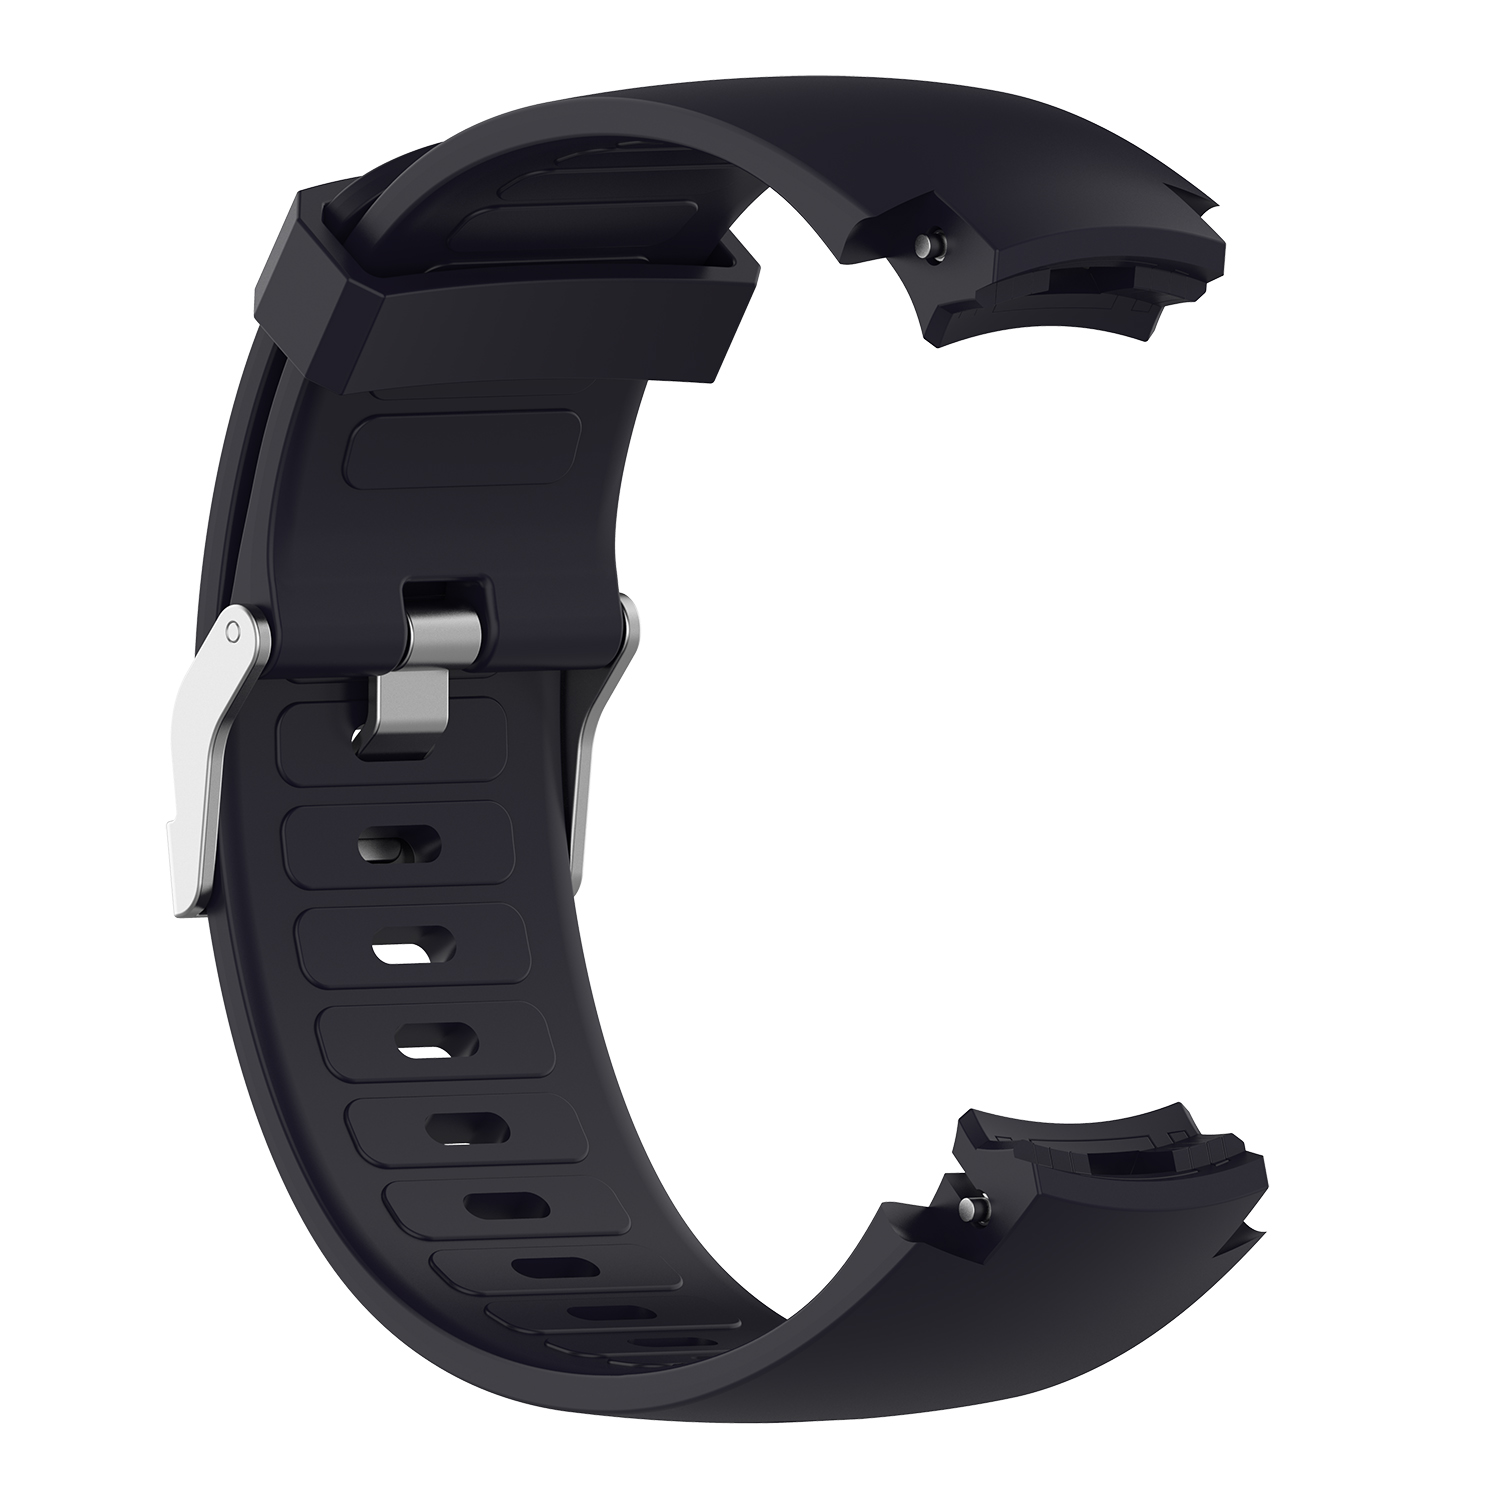 Bakeey-22mm-Multi-color-Silicone-Replacement-Strap-Smart-Watch-Band-For-Amazfit-Verge-1739374-8